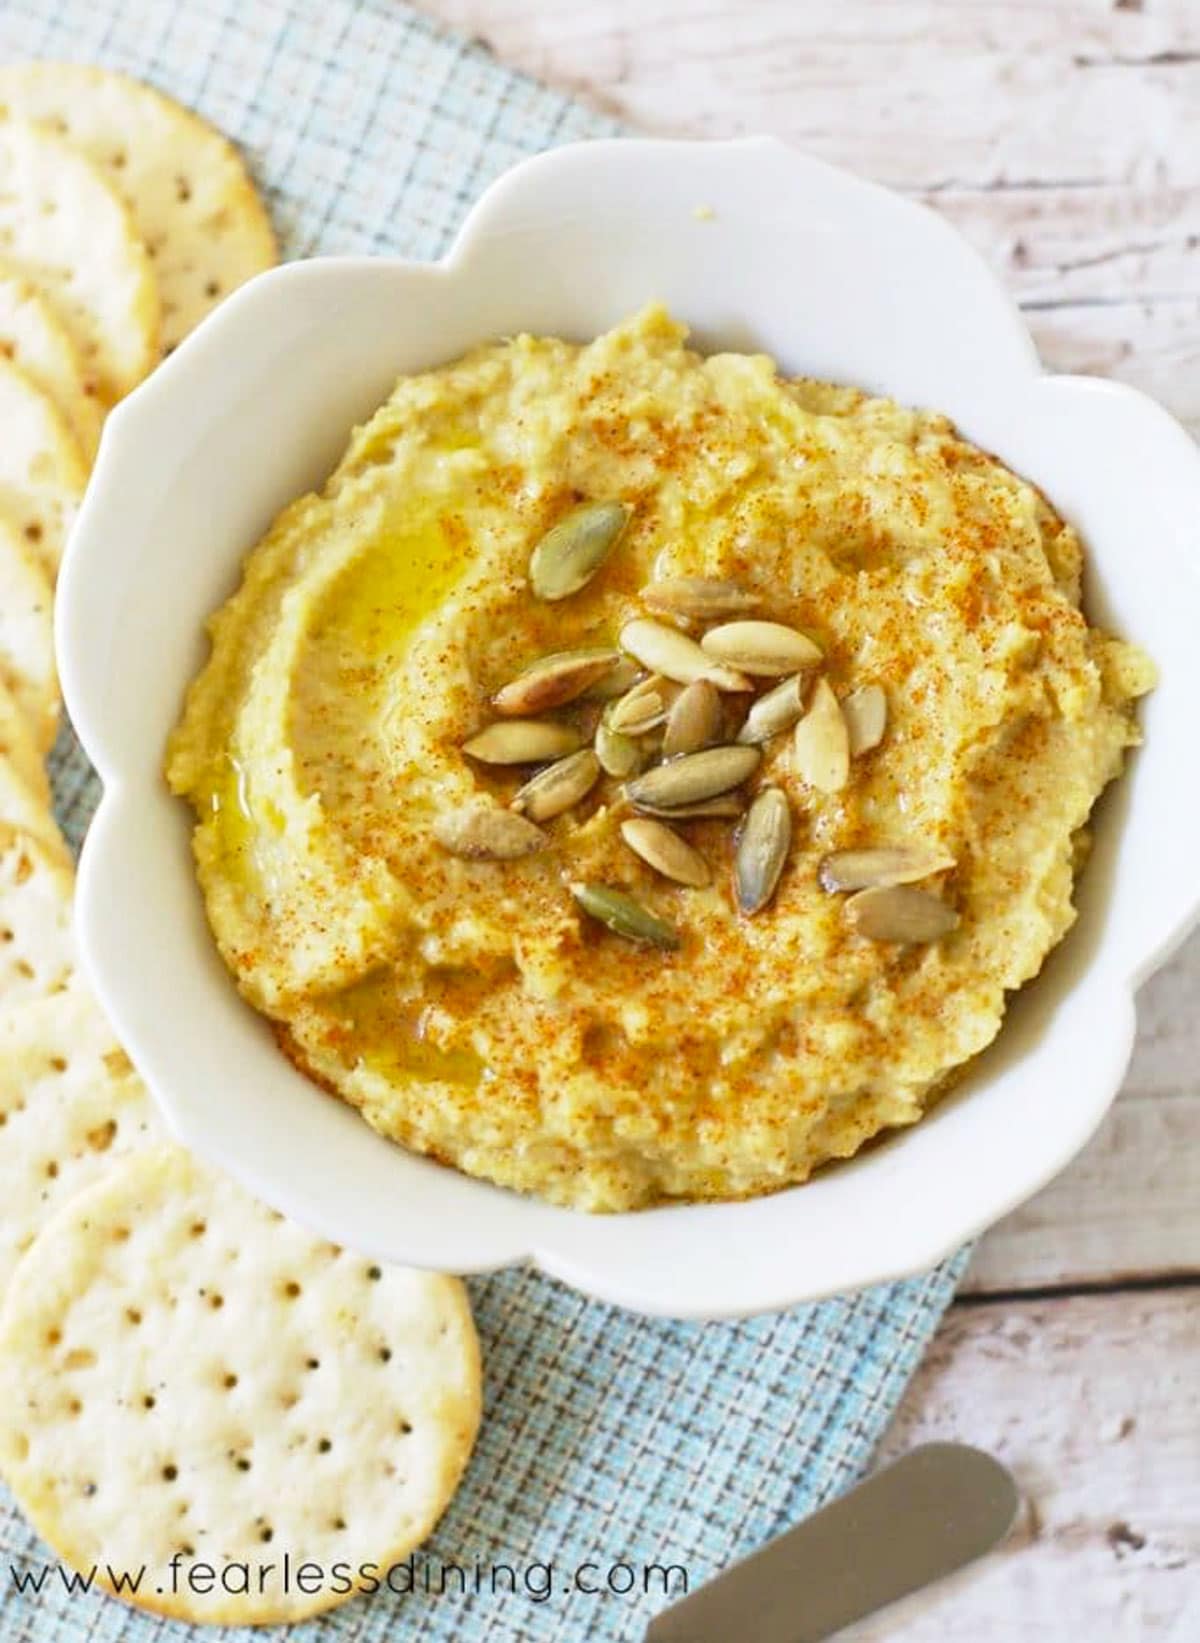 Roasted Hatch Chile Spicy Hummus